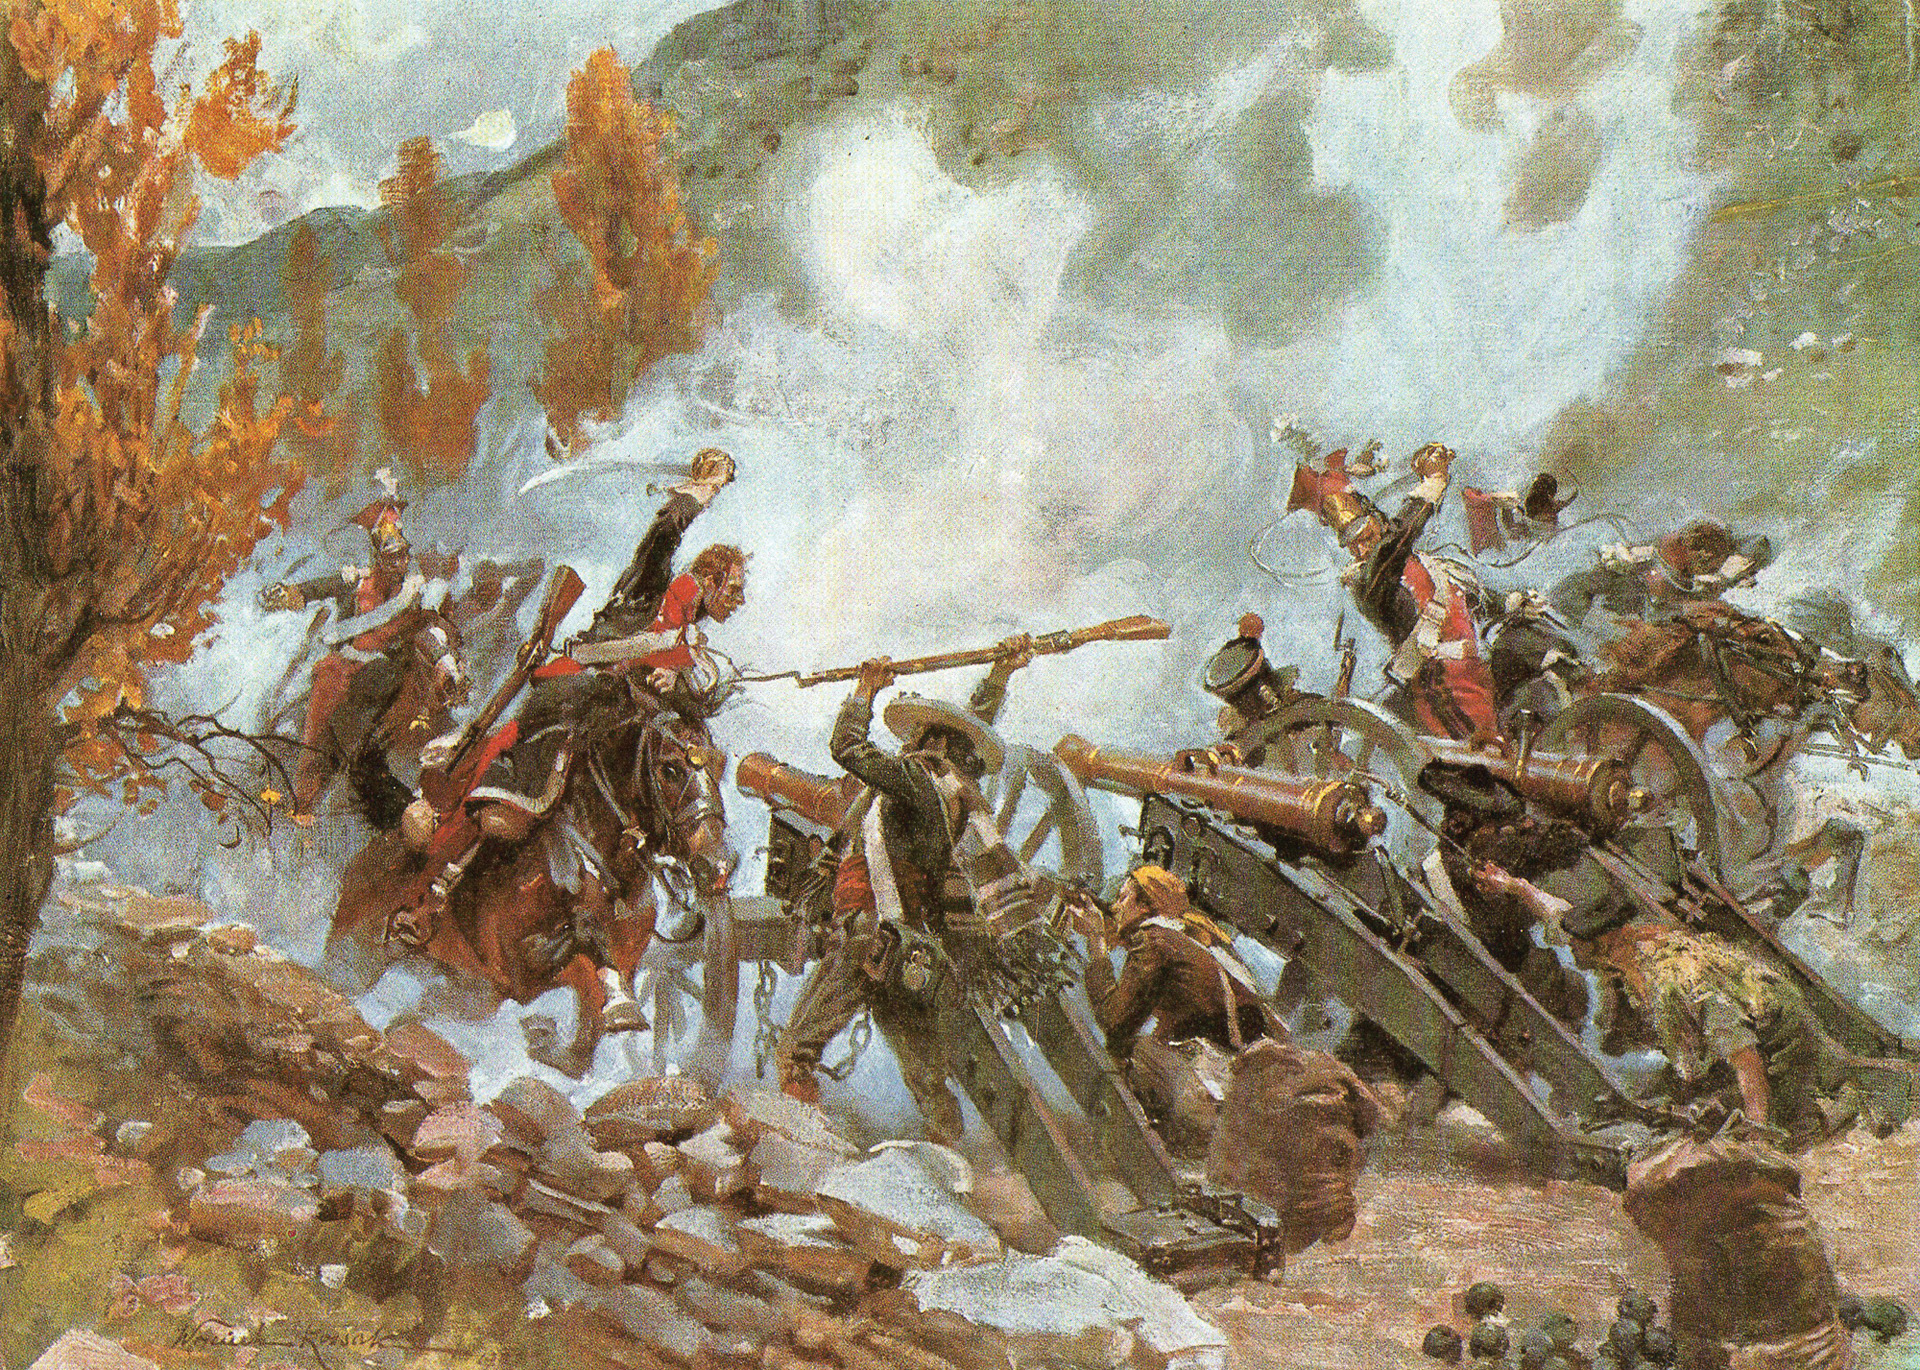 Polish light horsemen armed with sabers braved withering enemy fire to overrun multiple Spanish artillery positions blocking the road through the Somosierra mountain pass.